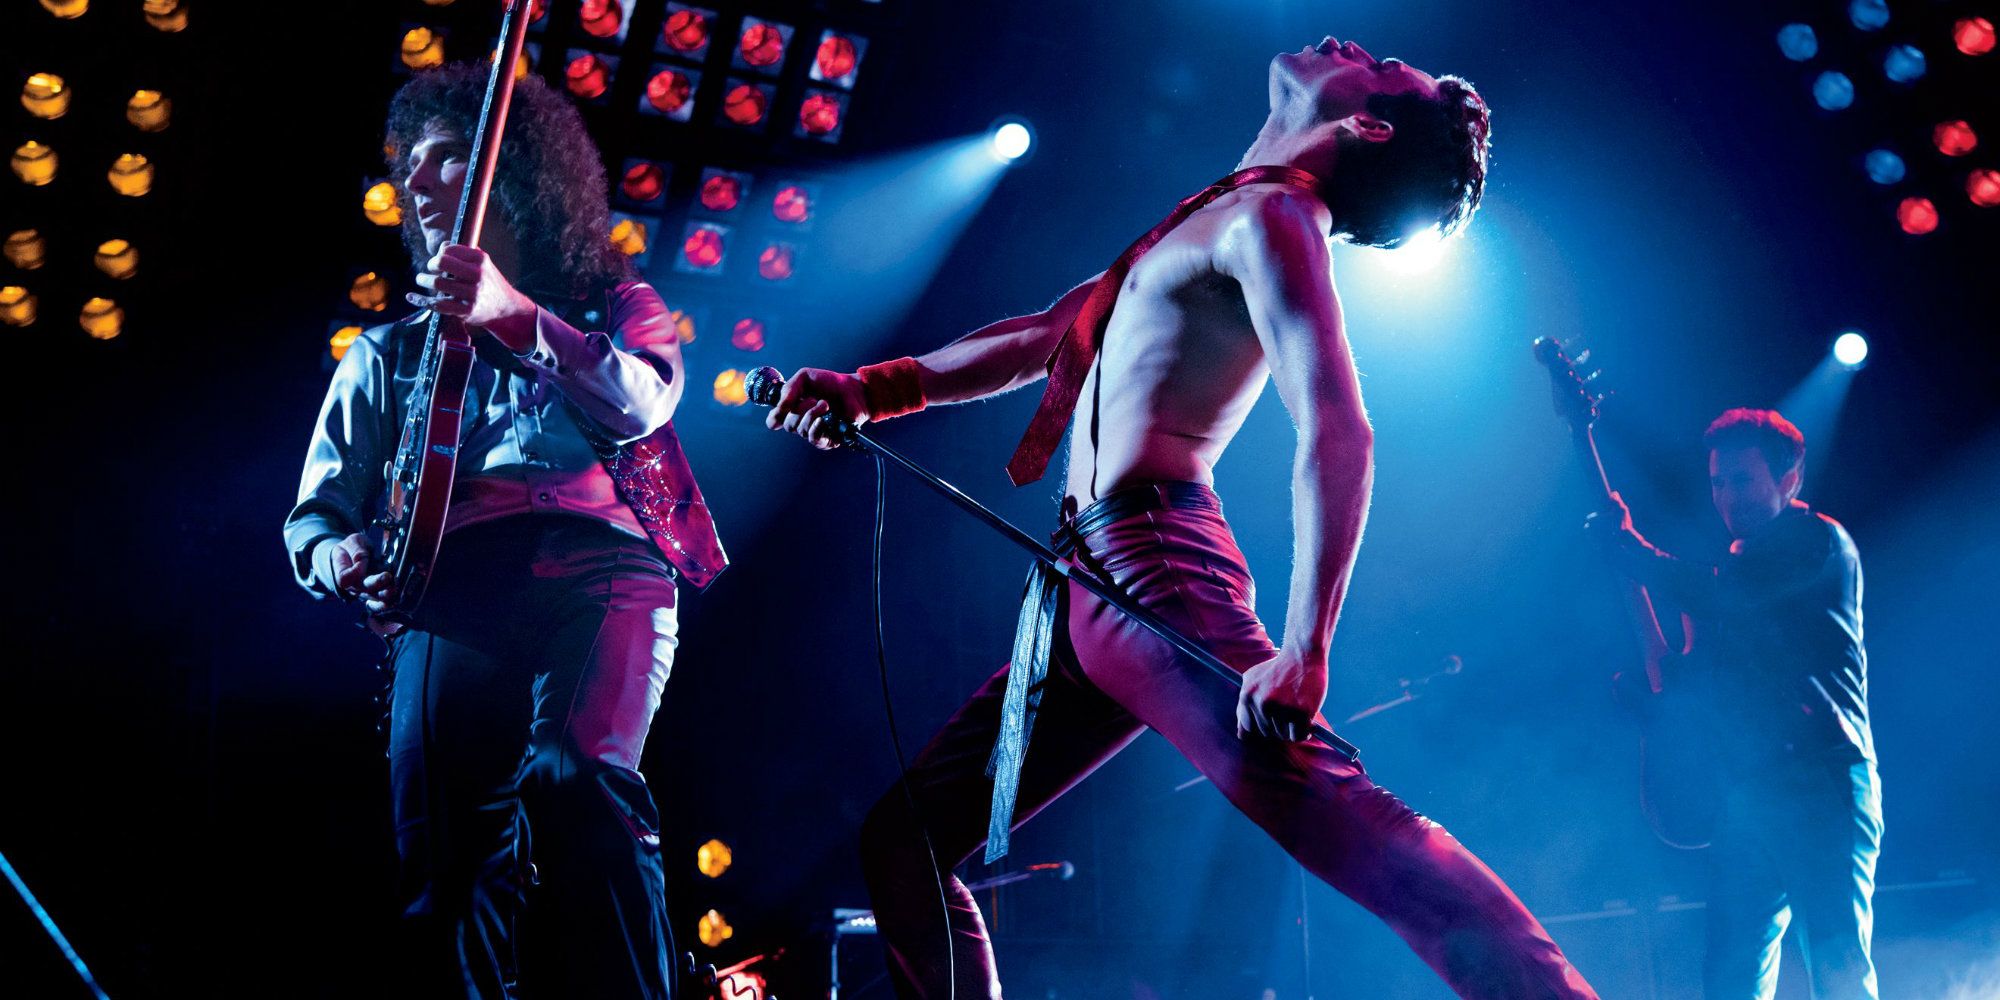 Freddie Mercury theatrically performing onstage with Queen in Bohemian Rhapsody